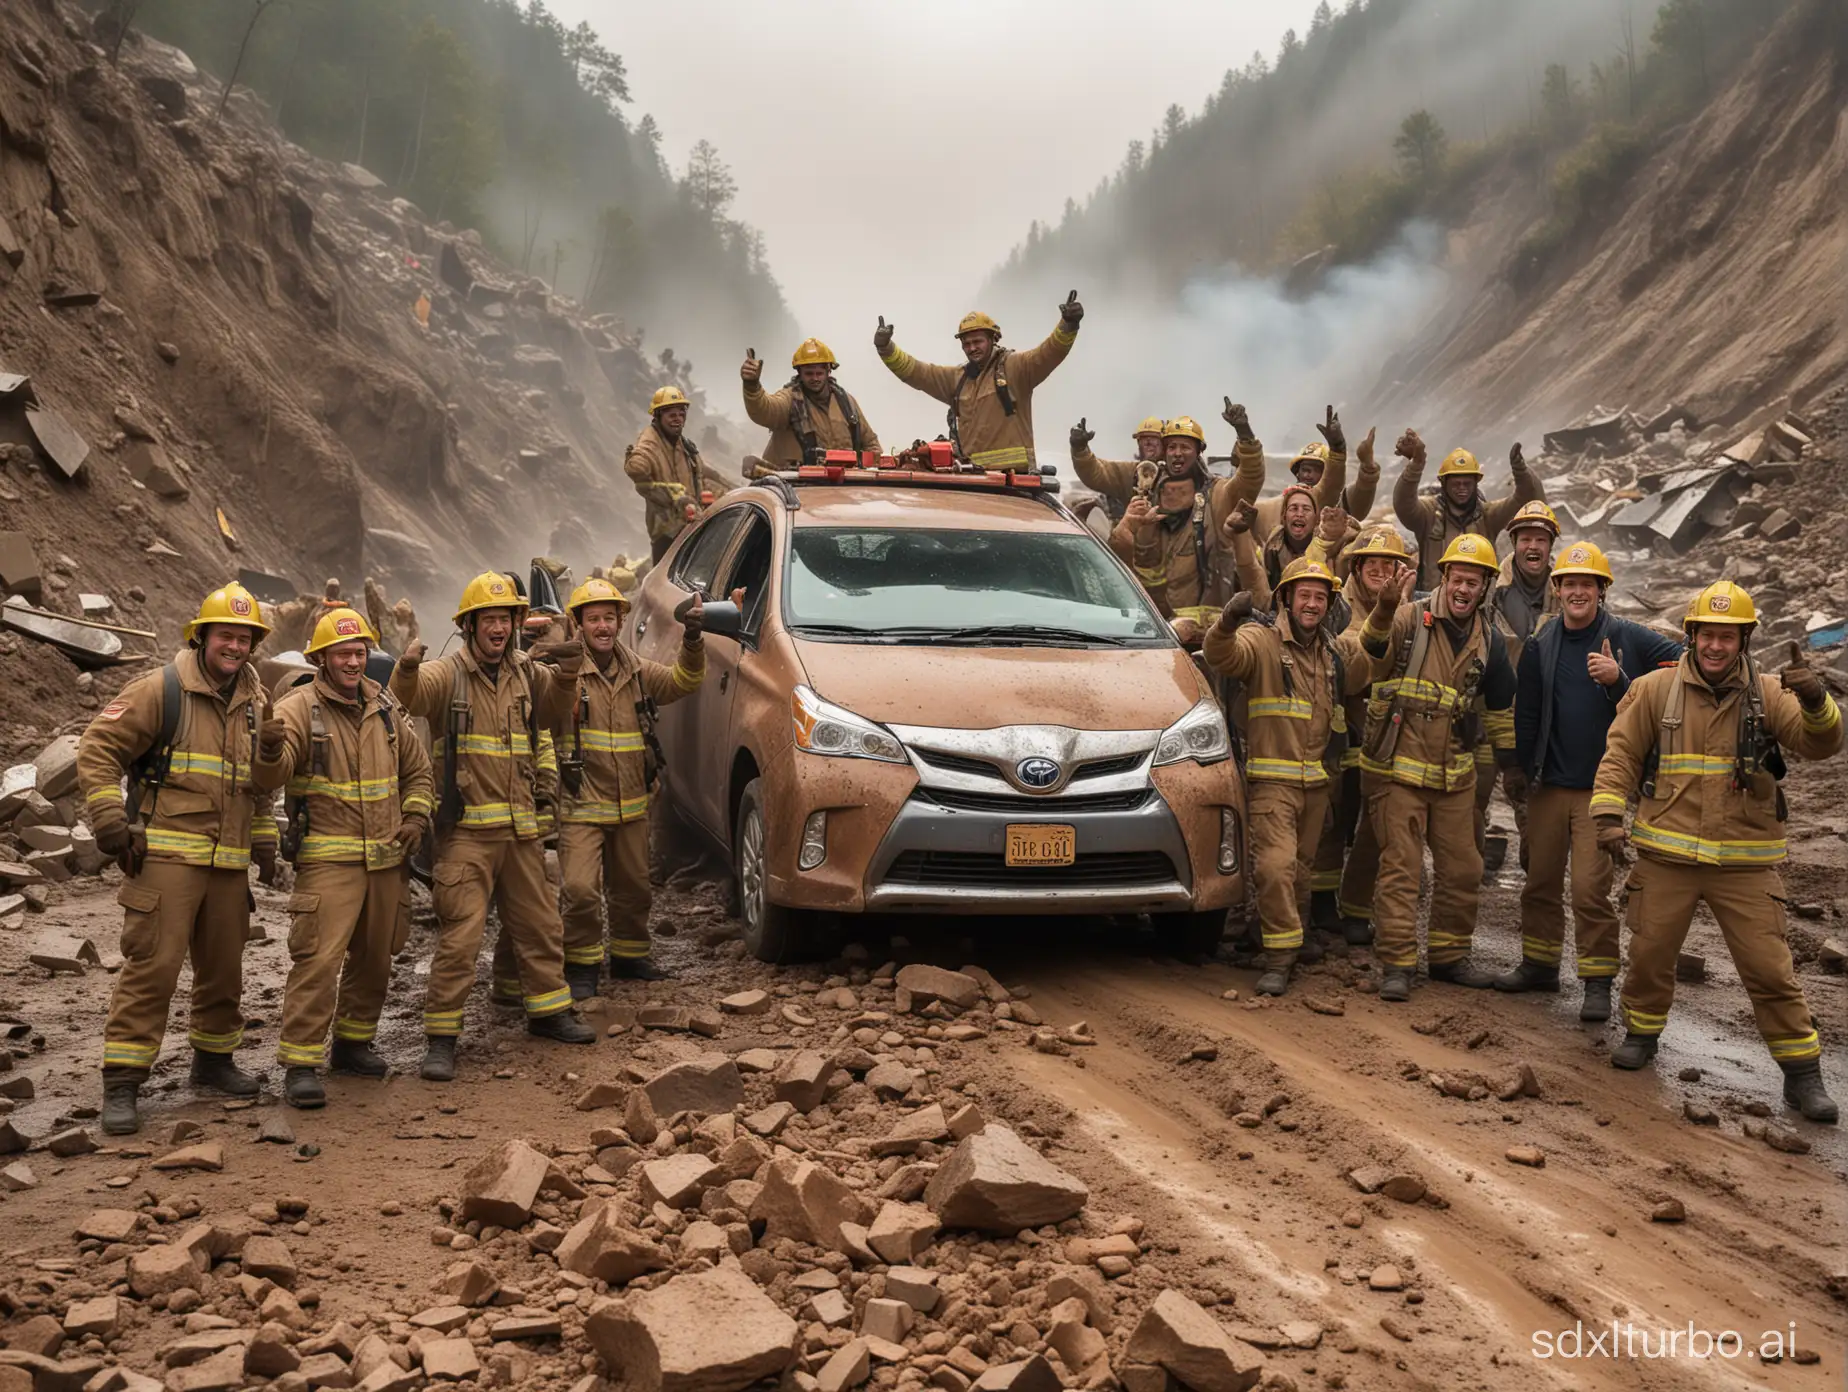 Firefighters-Celebrating-Victory-Over-Landslide-at-Big-Sur-with-Thumbs-Up-from-Driver